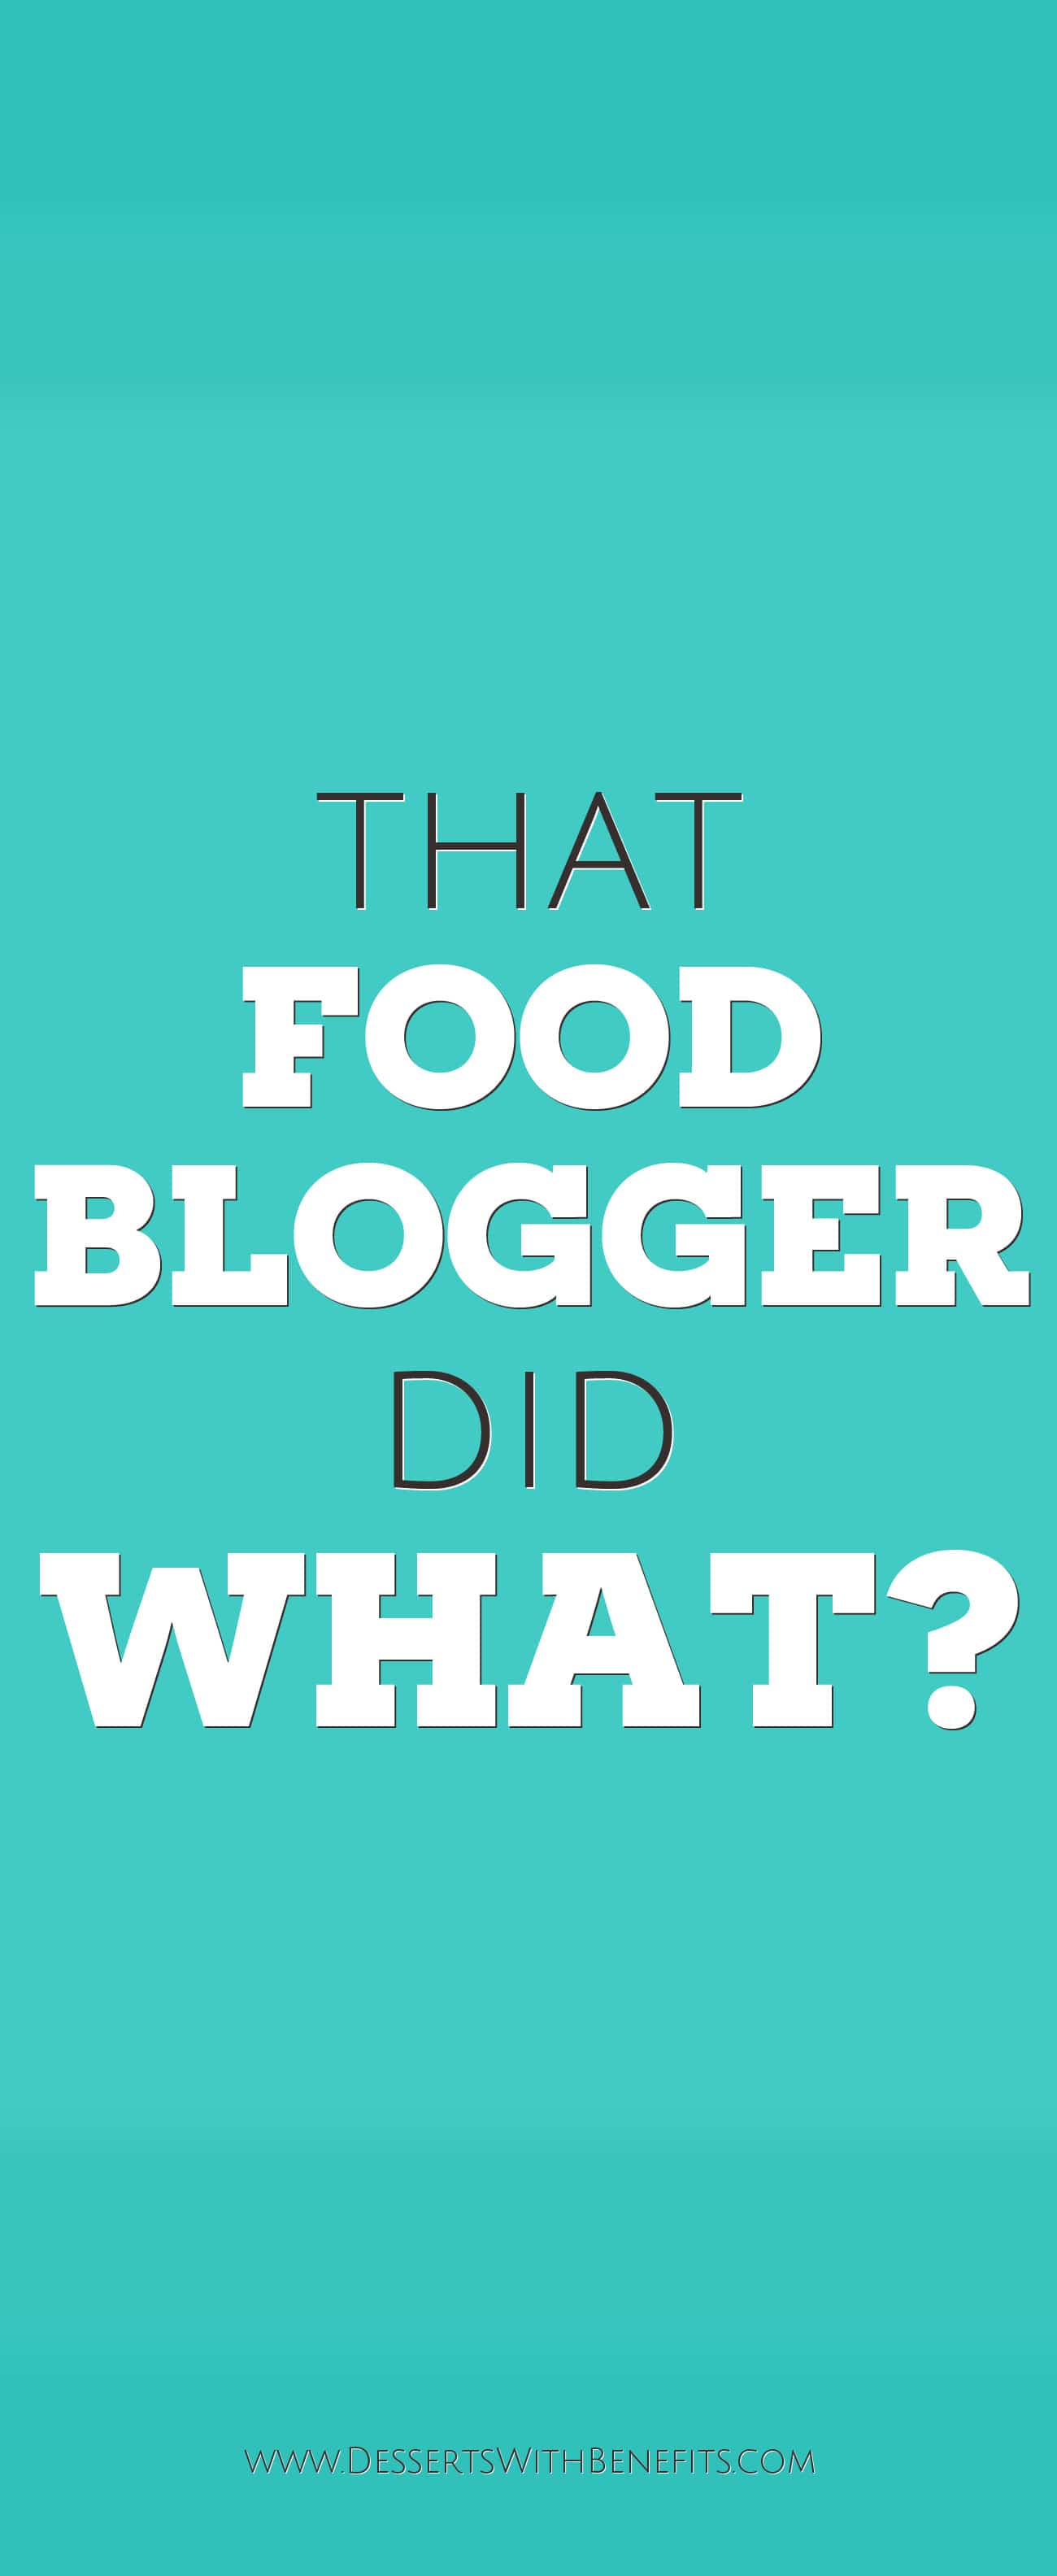 That Food Blogger Did What?? -- The Desserts With Benefits Blog